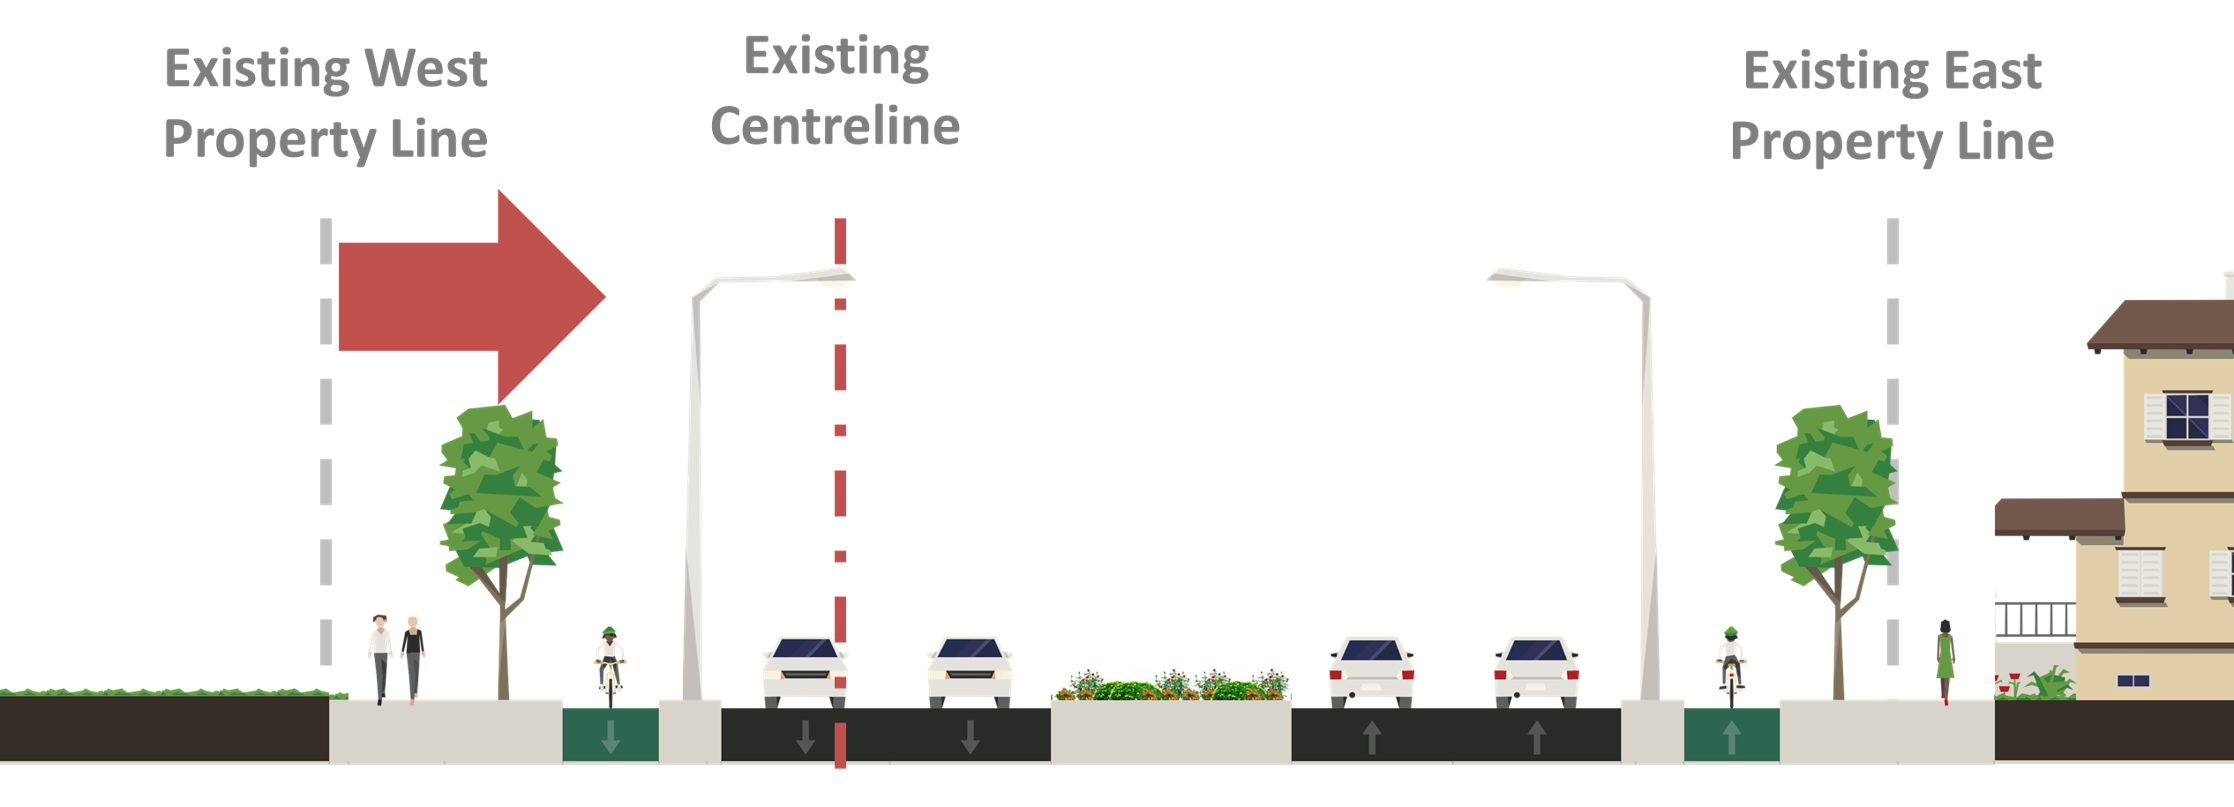 Alternative 3 road widening with widening to the east